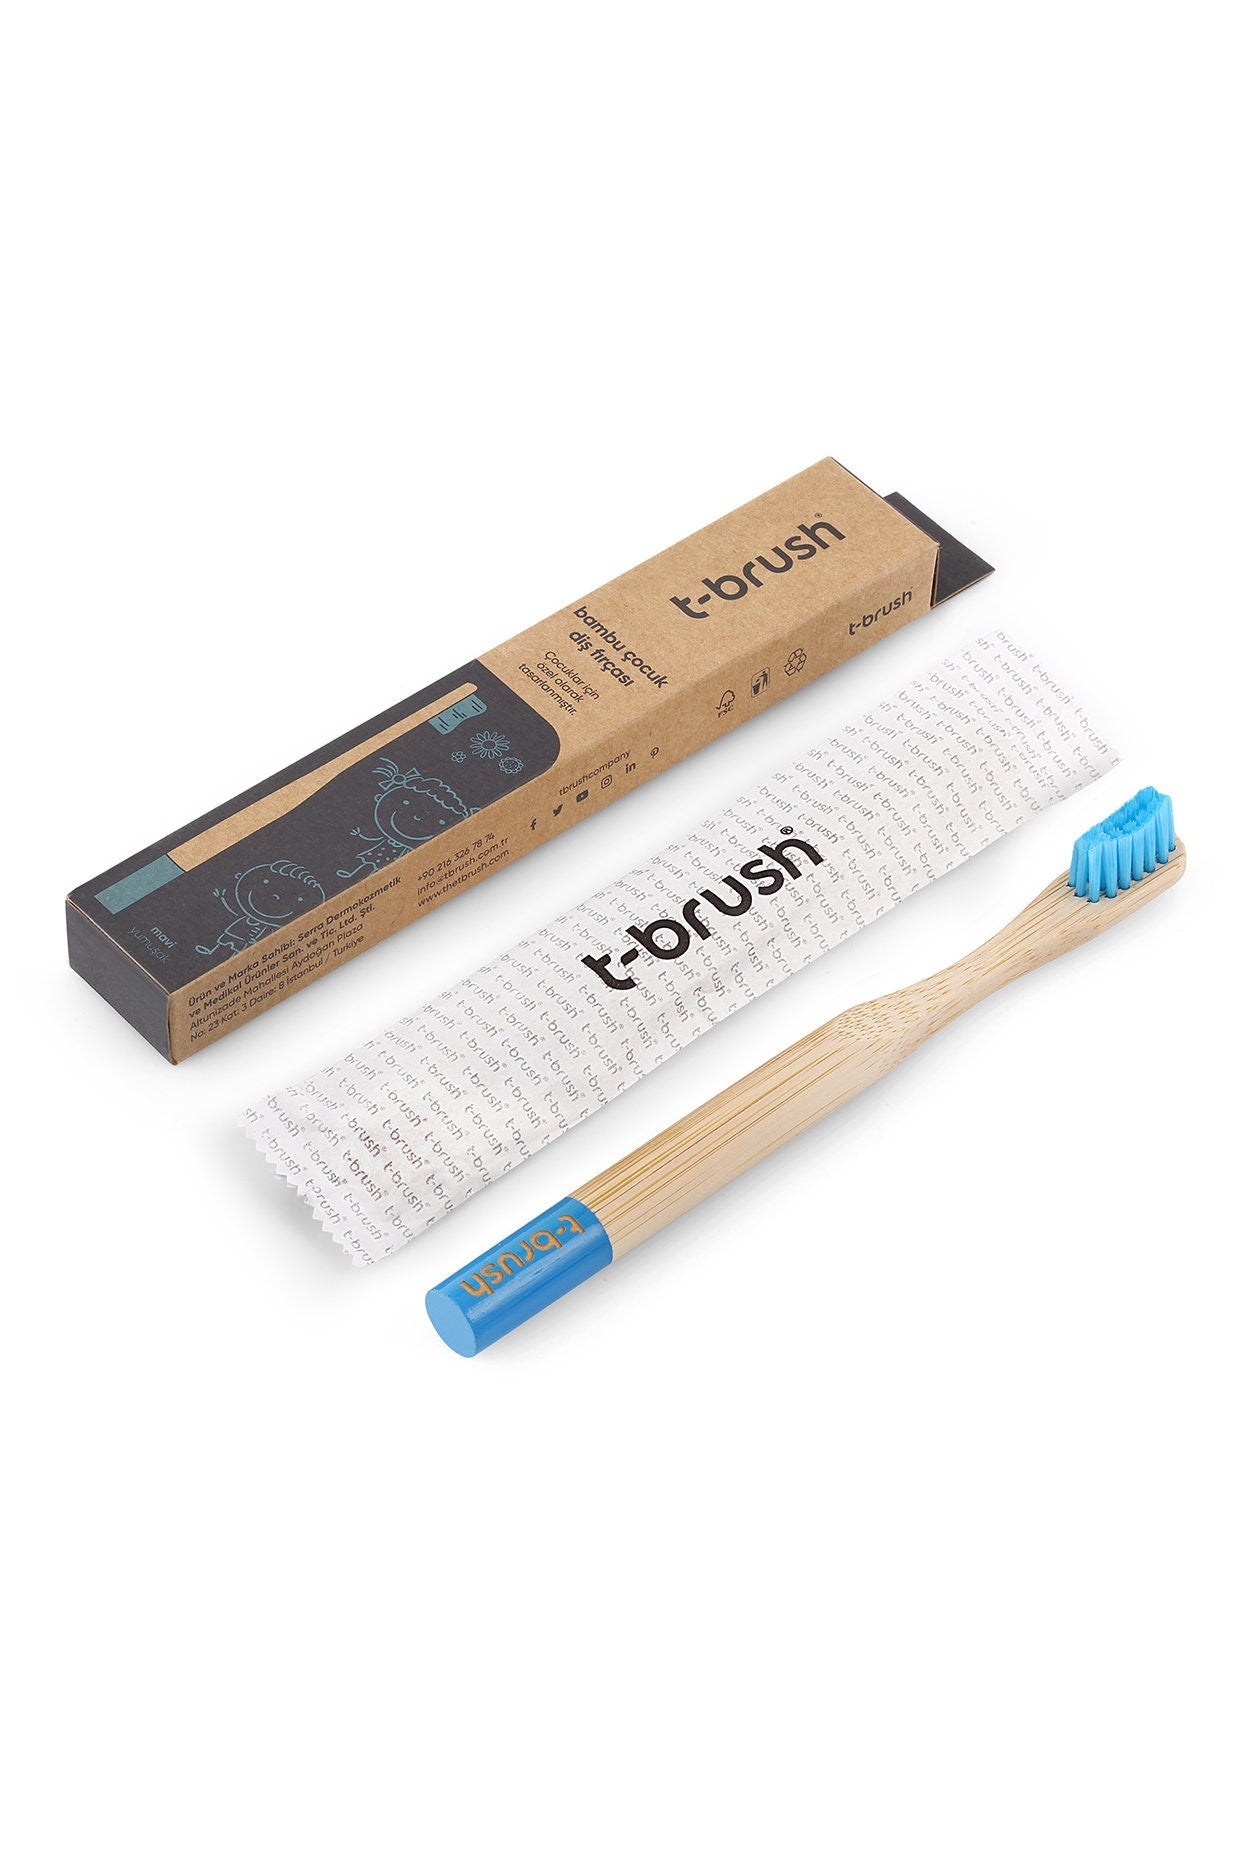 T-Brush Kids Bamboo Toothbrush - Blue - Pink Colour - Dupont Bristles - The Best Duo = Dupont + Bamboo - Best Gift - Cute Fun Toothbrush